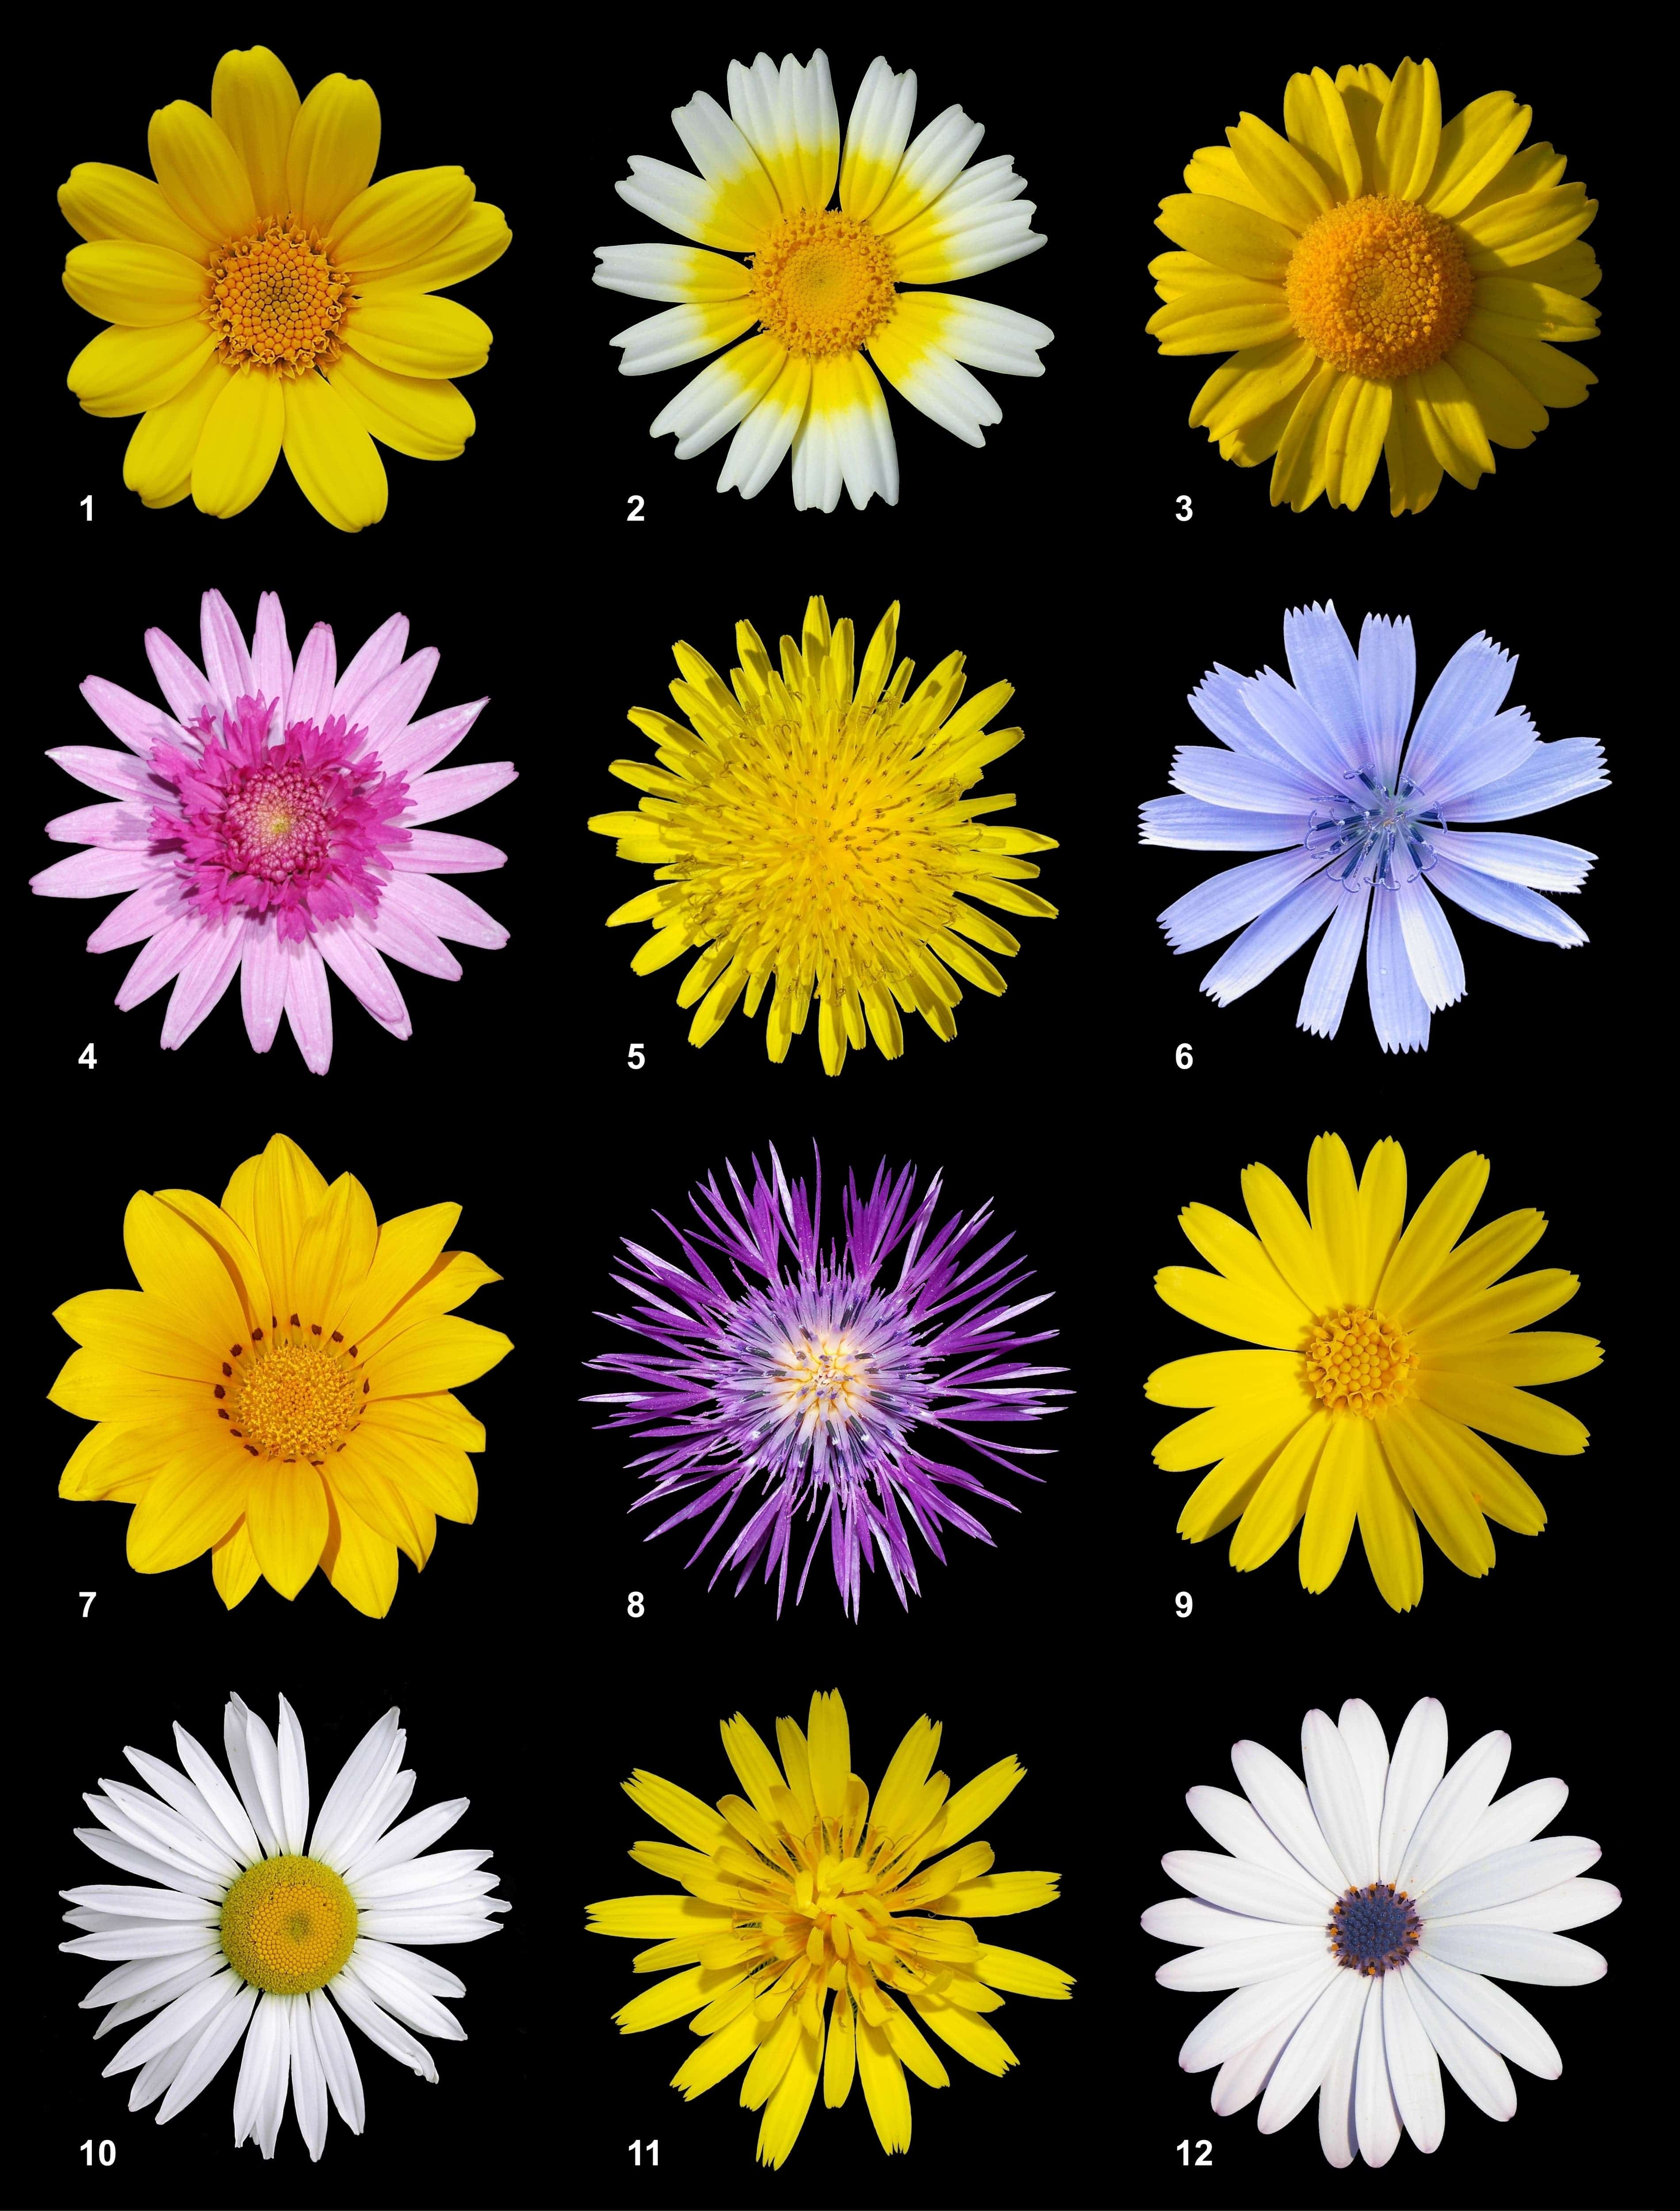 Flowering plants are extremely diverse. Image credits: Alvesgaspar, Tony Wills.